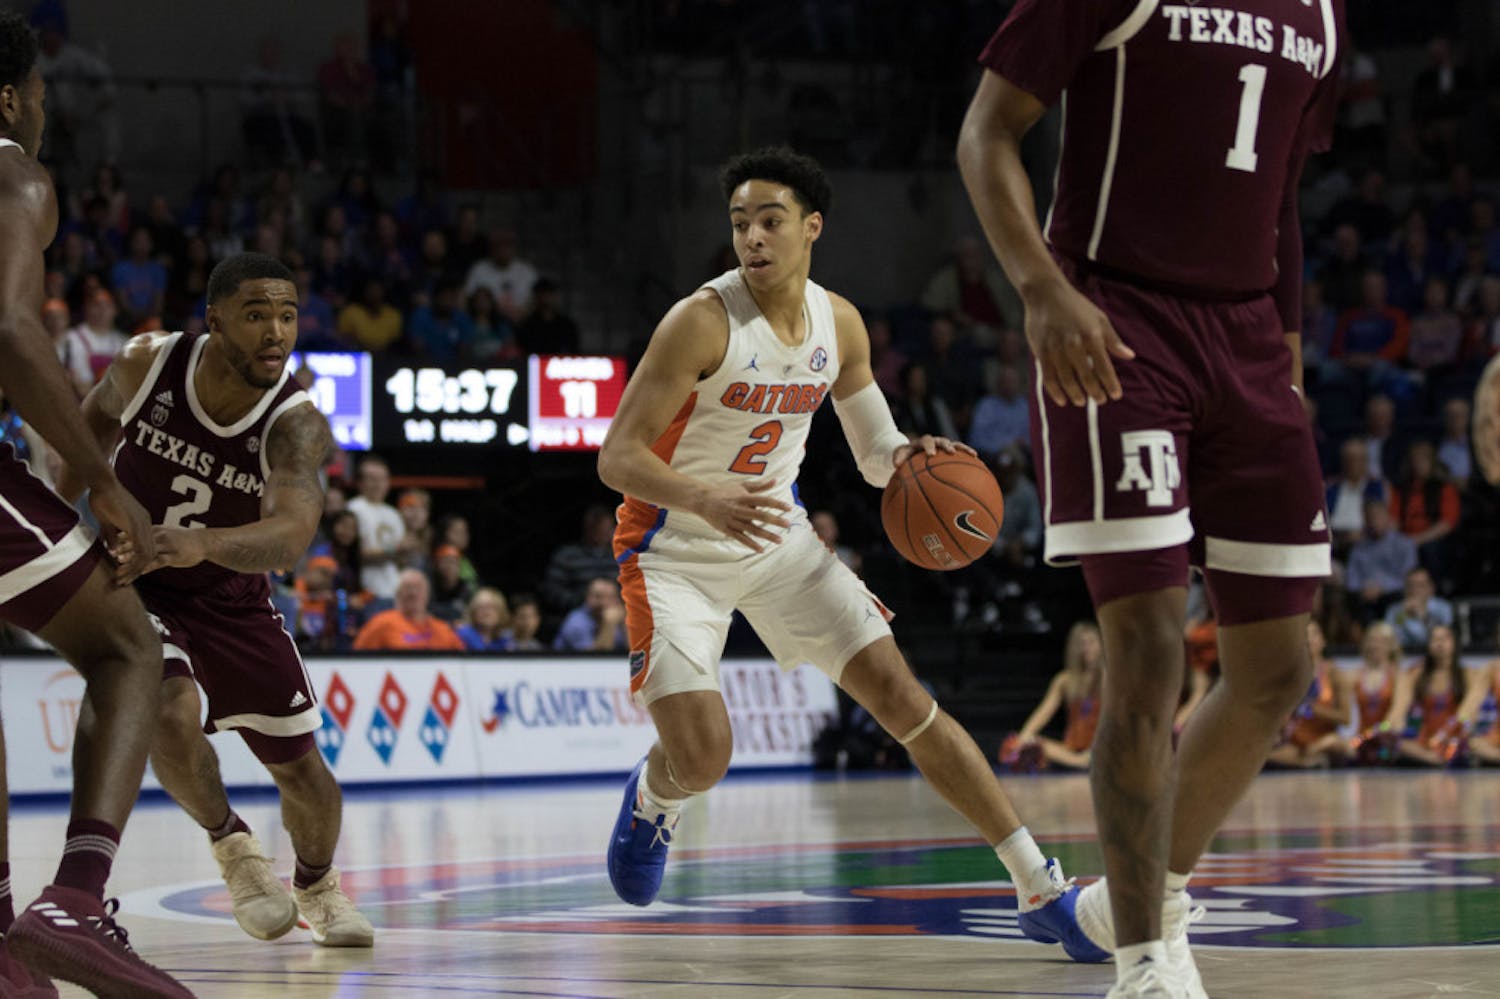 Florida guard Andrew Nembhard recorded 11 assists in Florida's 81-72 win over Texas A&amp;M on Jan. 22.
&nbsp;